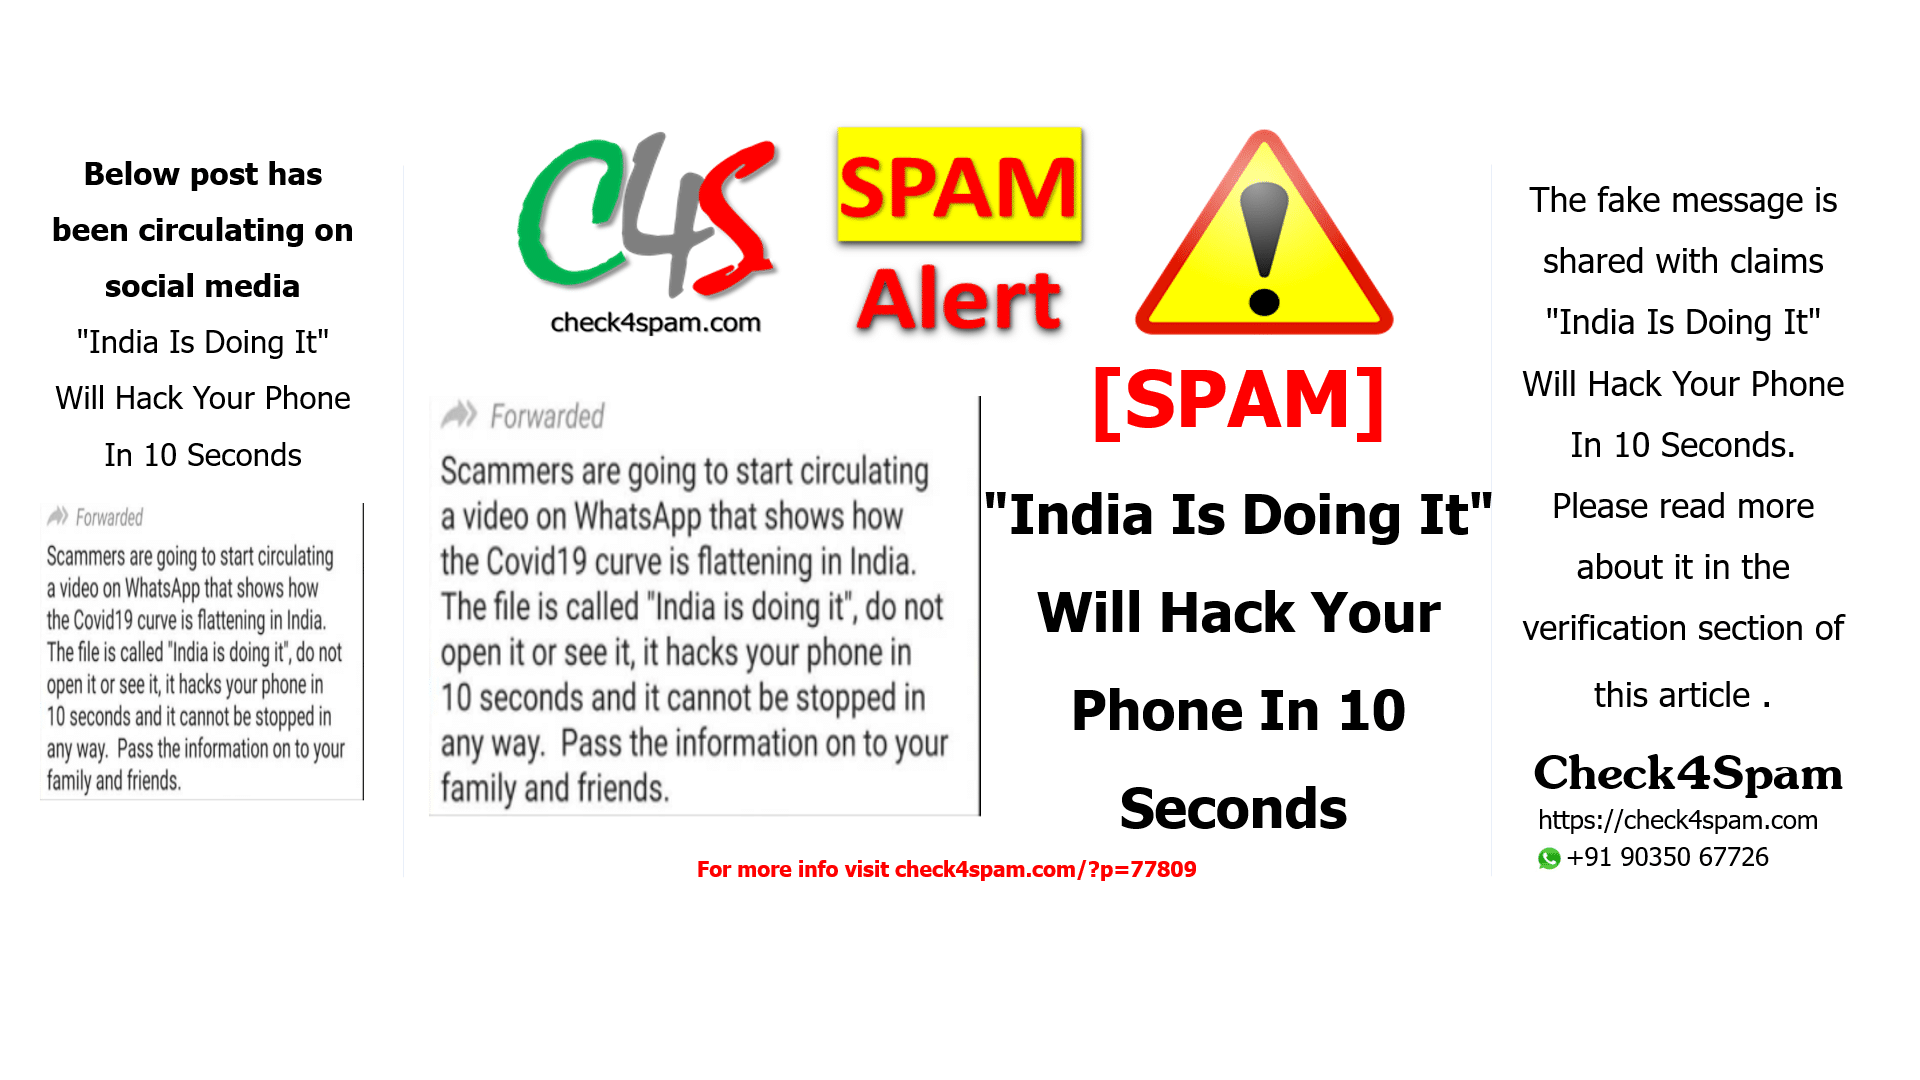 "India Is Doing It" Will Hack Your Phone In 10 Seconds